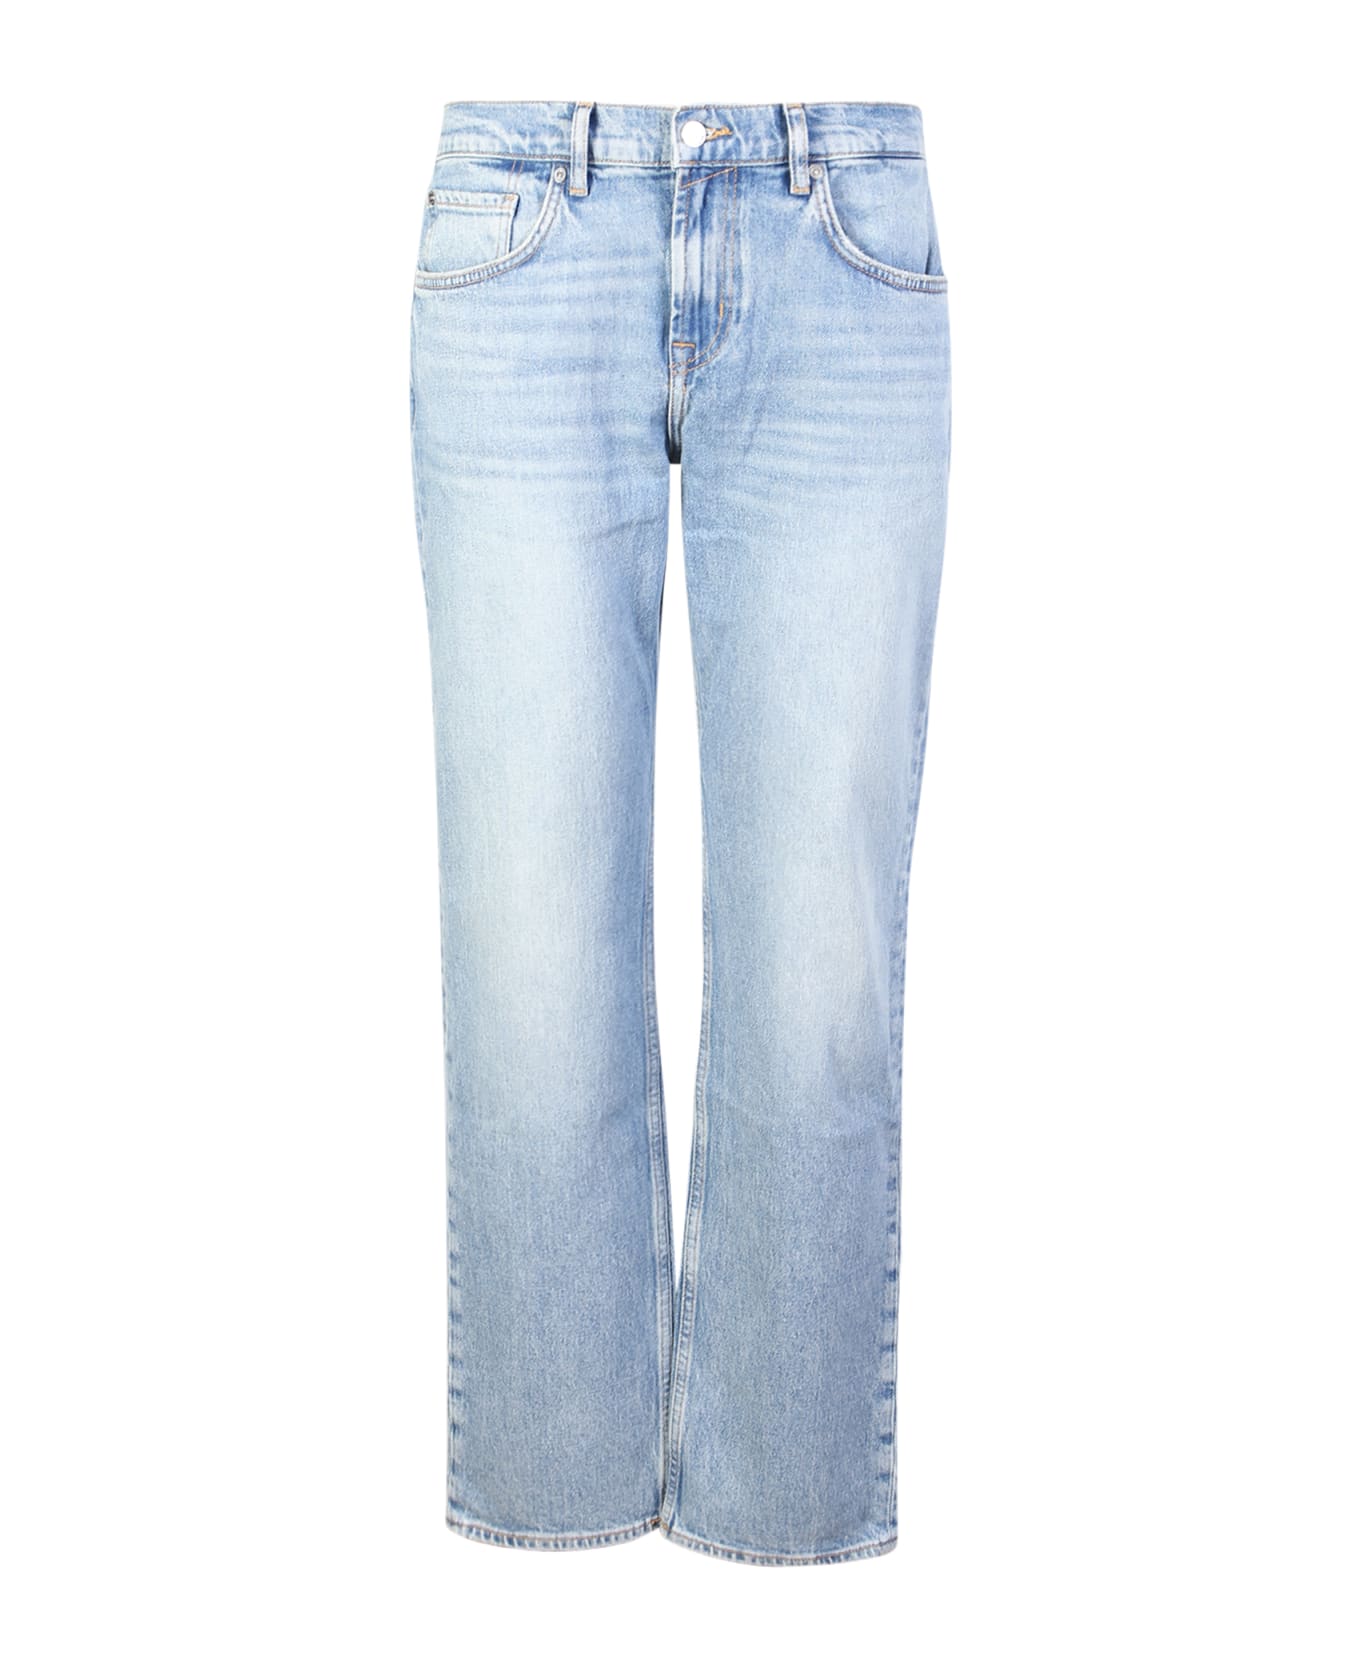 7 For All Mankind Jeans The Straight Waterfall - Blue